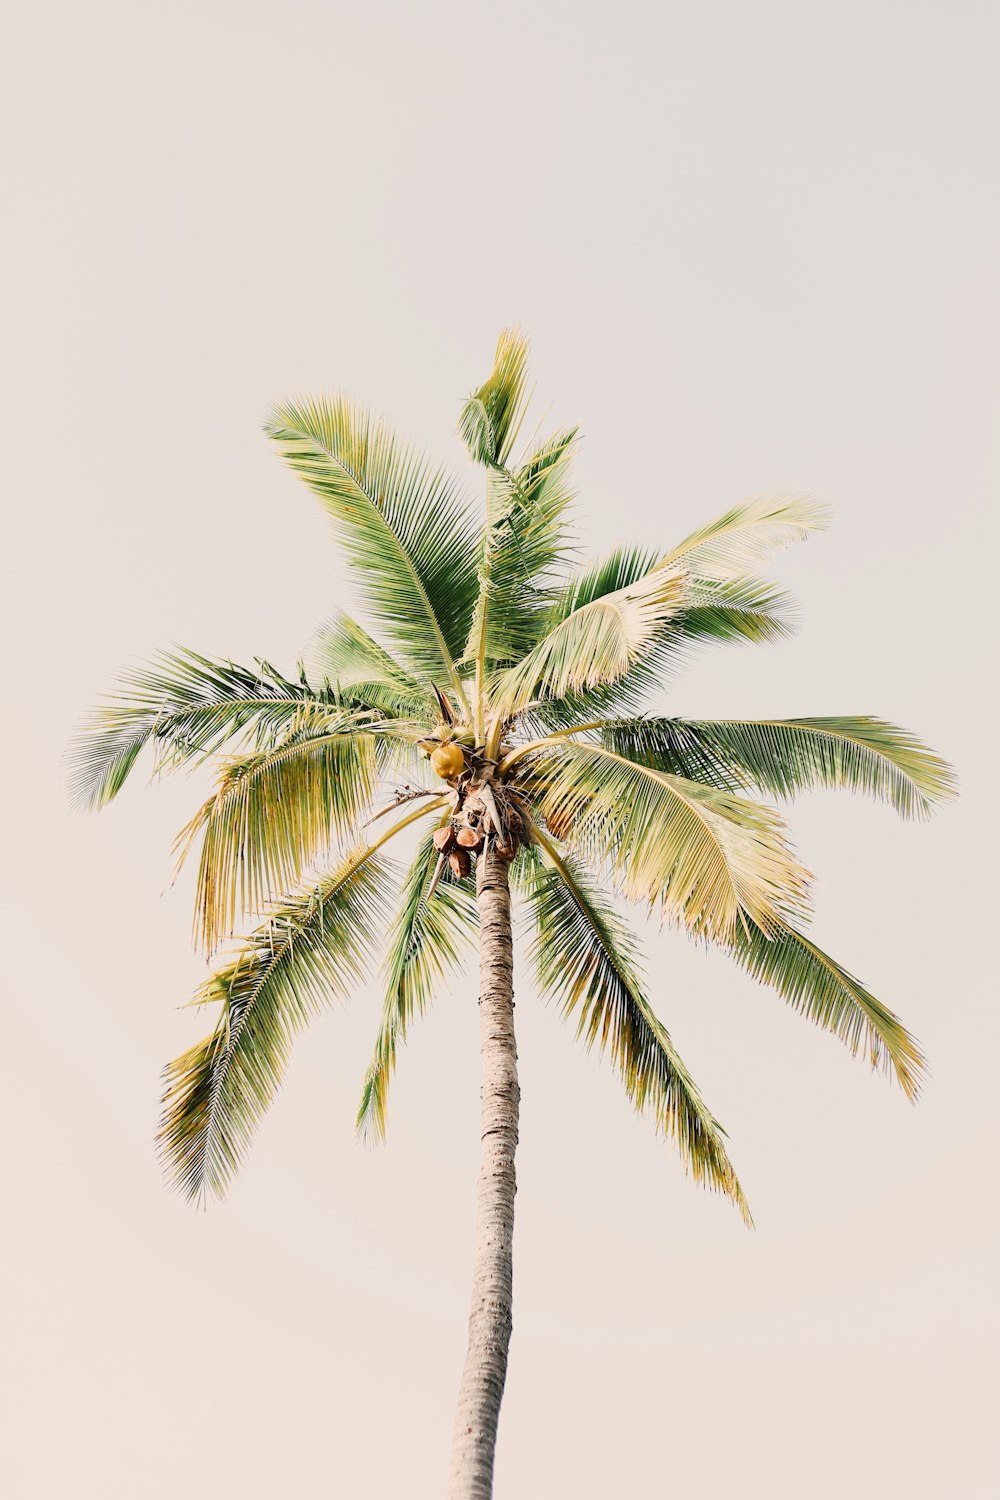 20 Palm Tree Pictures Hd Download Free Images On Unsplash